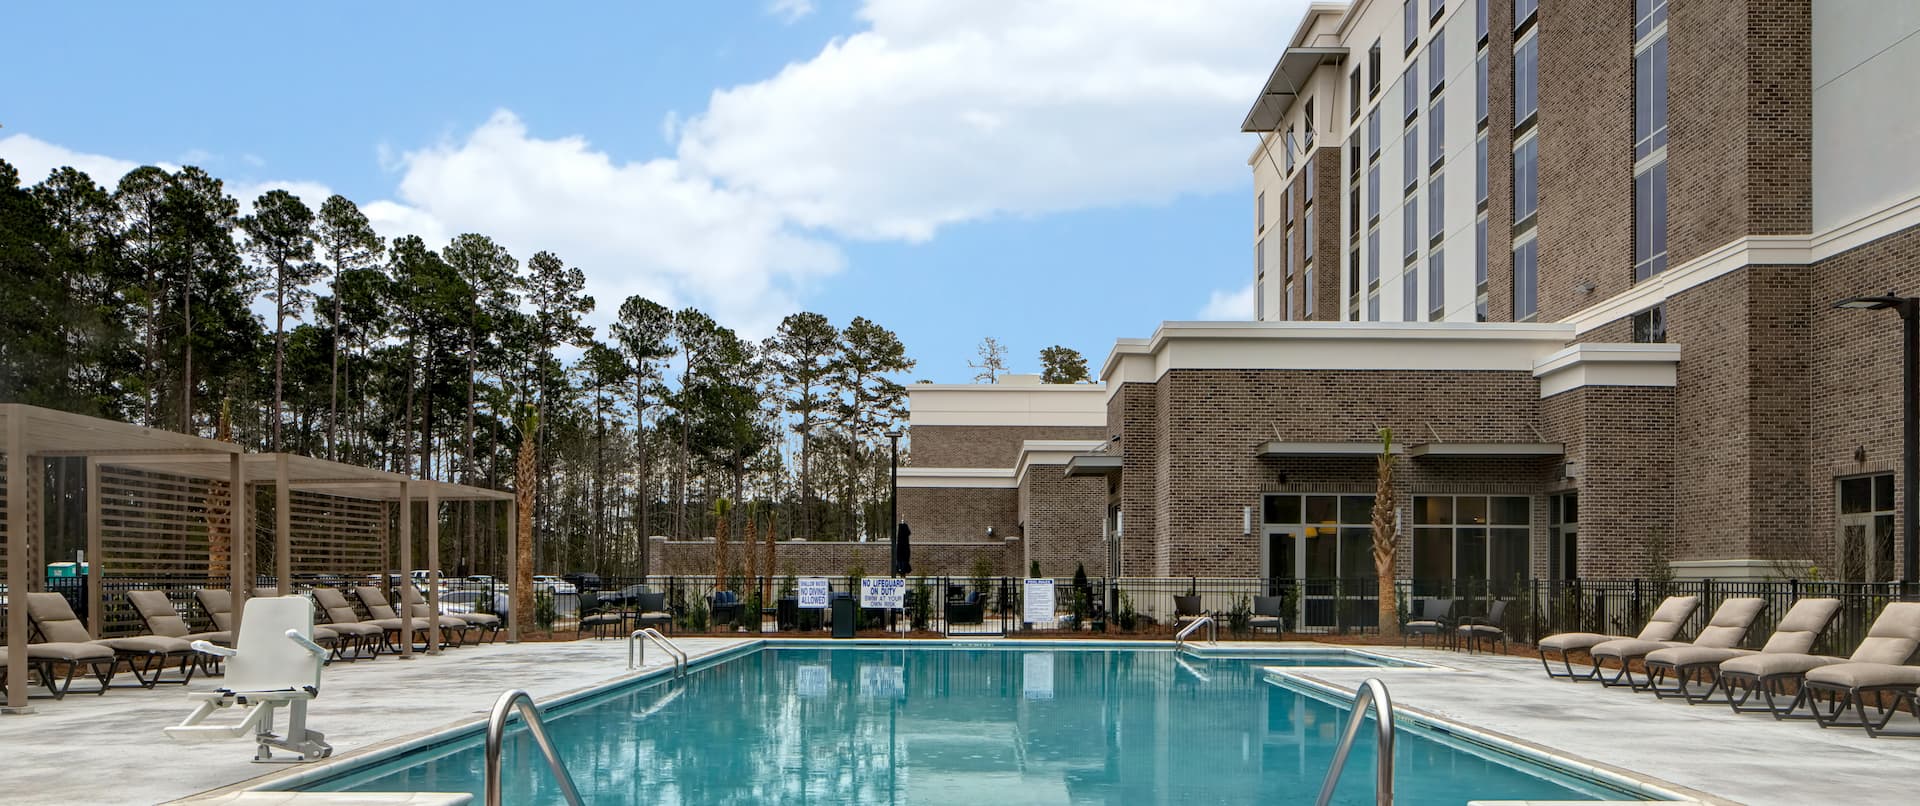 exterior pool and building